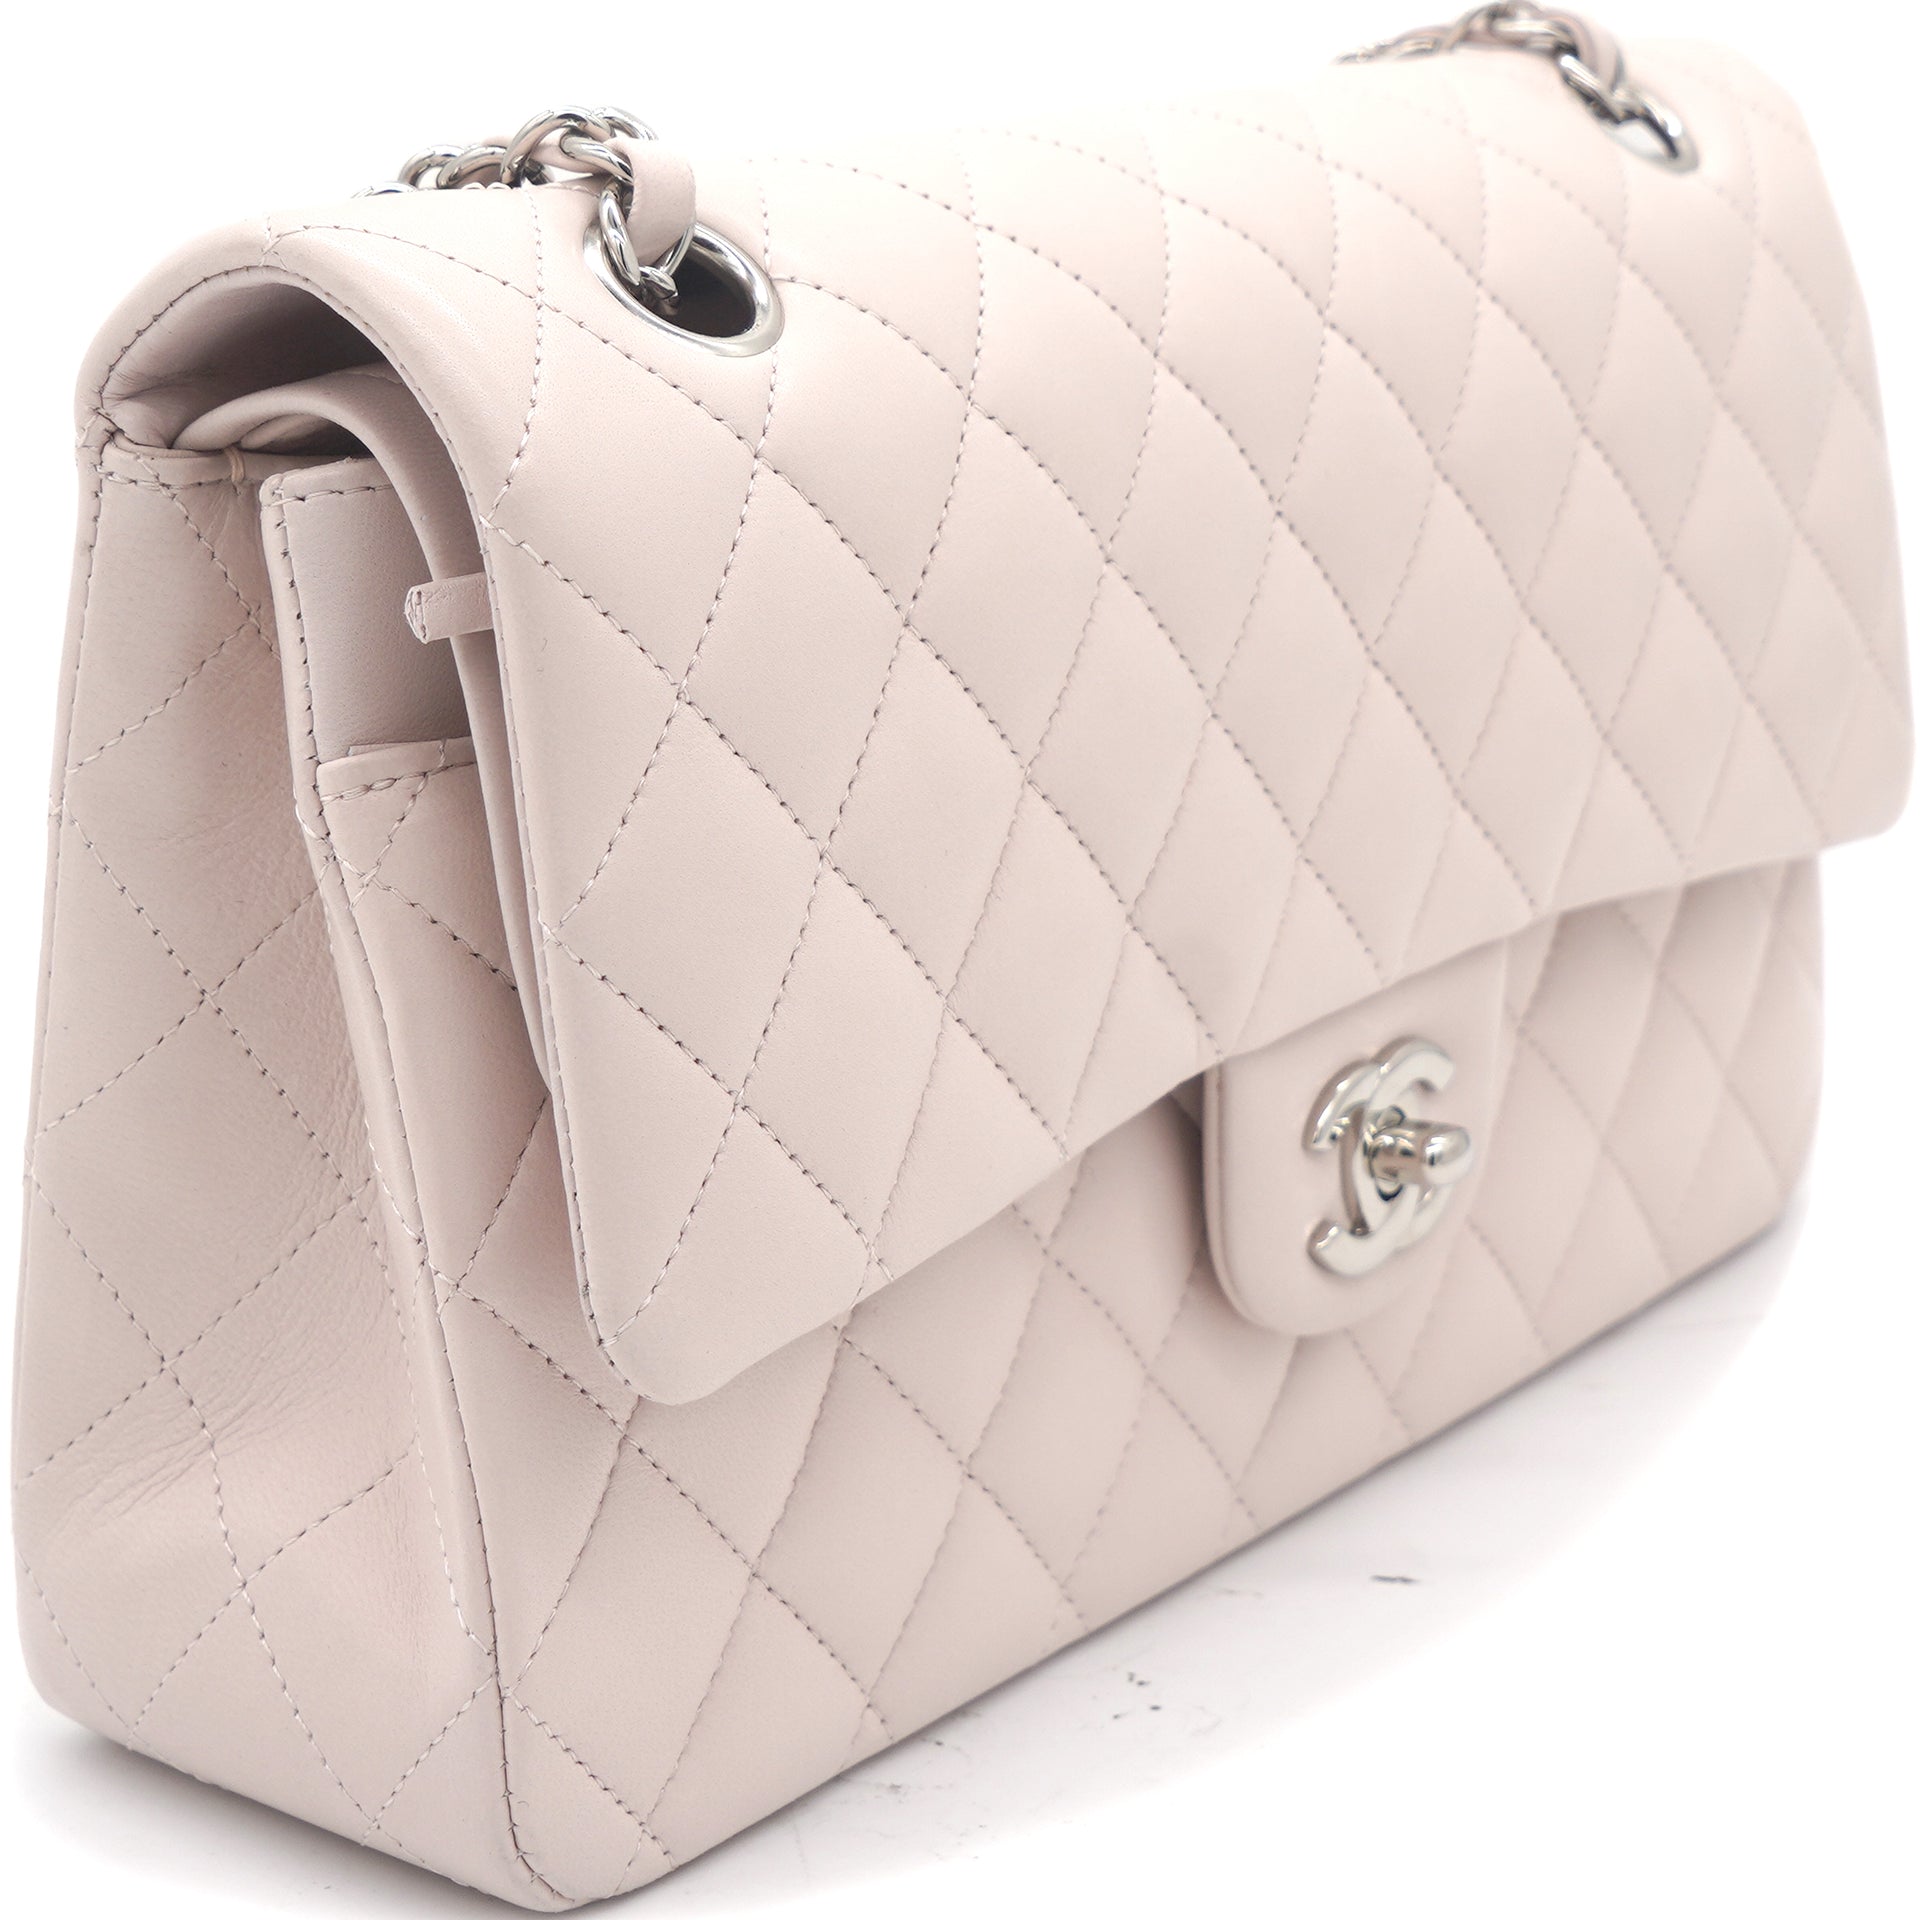 Chanel Light Pink Quilted Lambskin Leather Classic Double Flap Bag